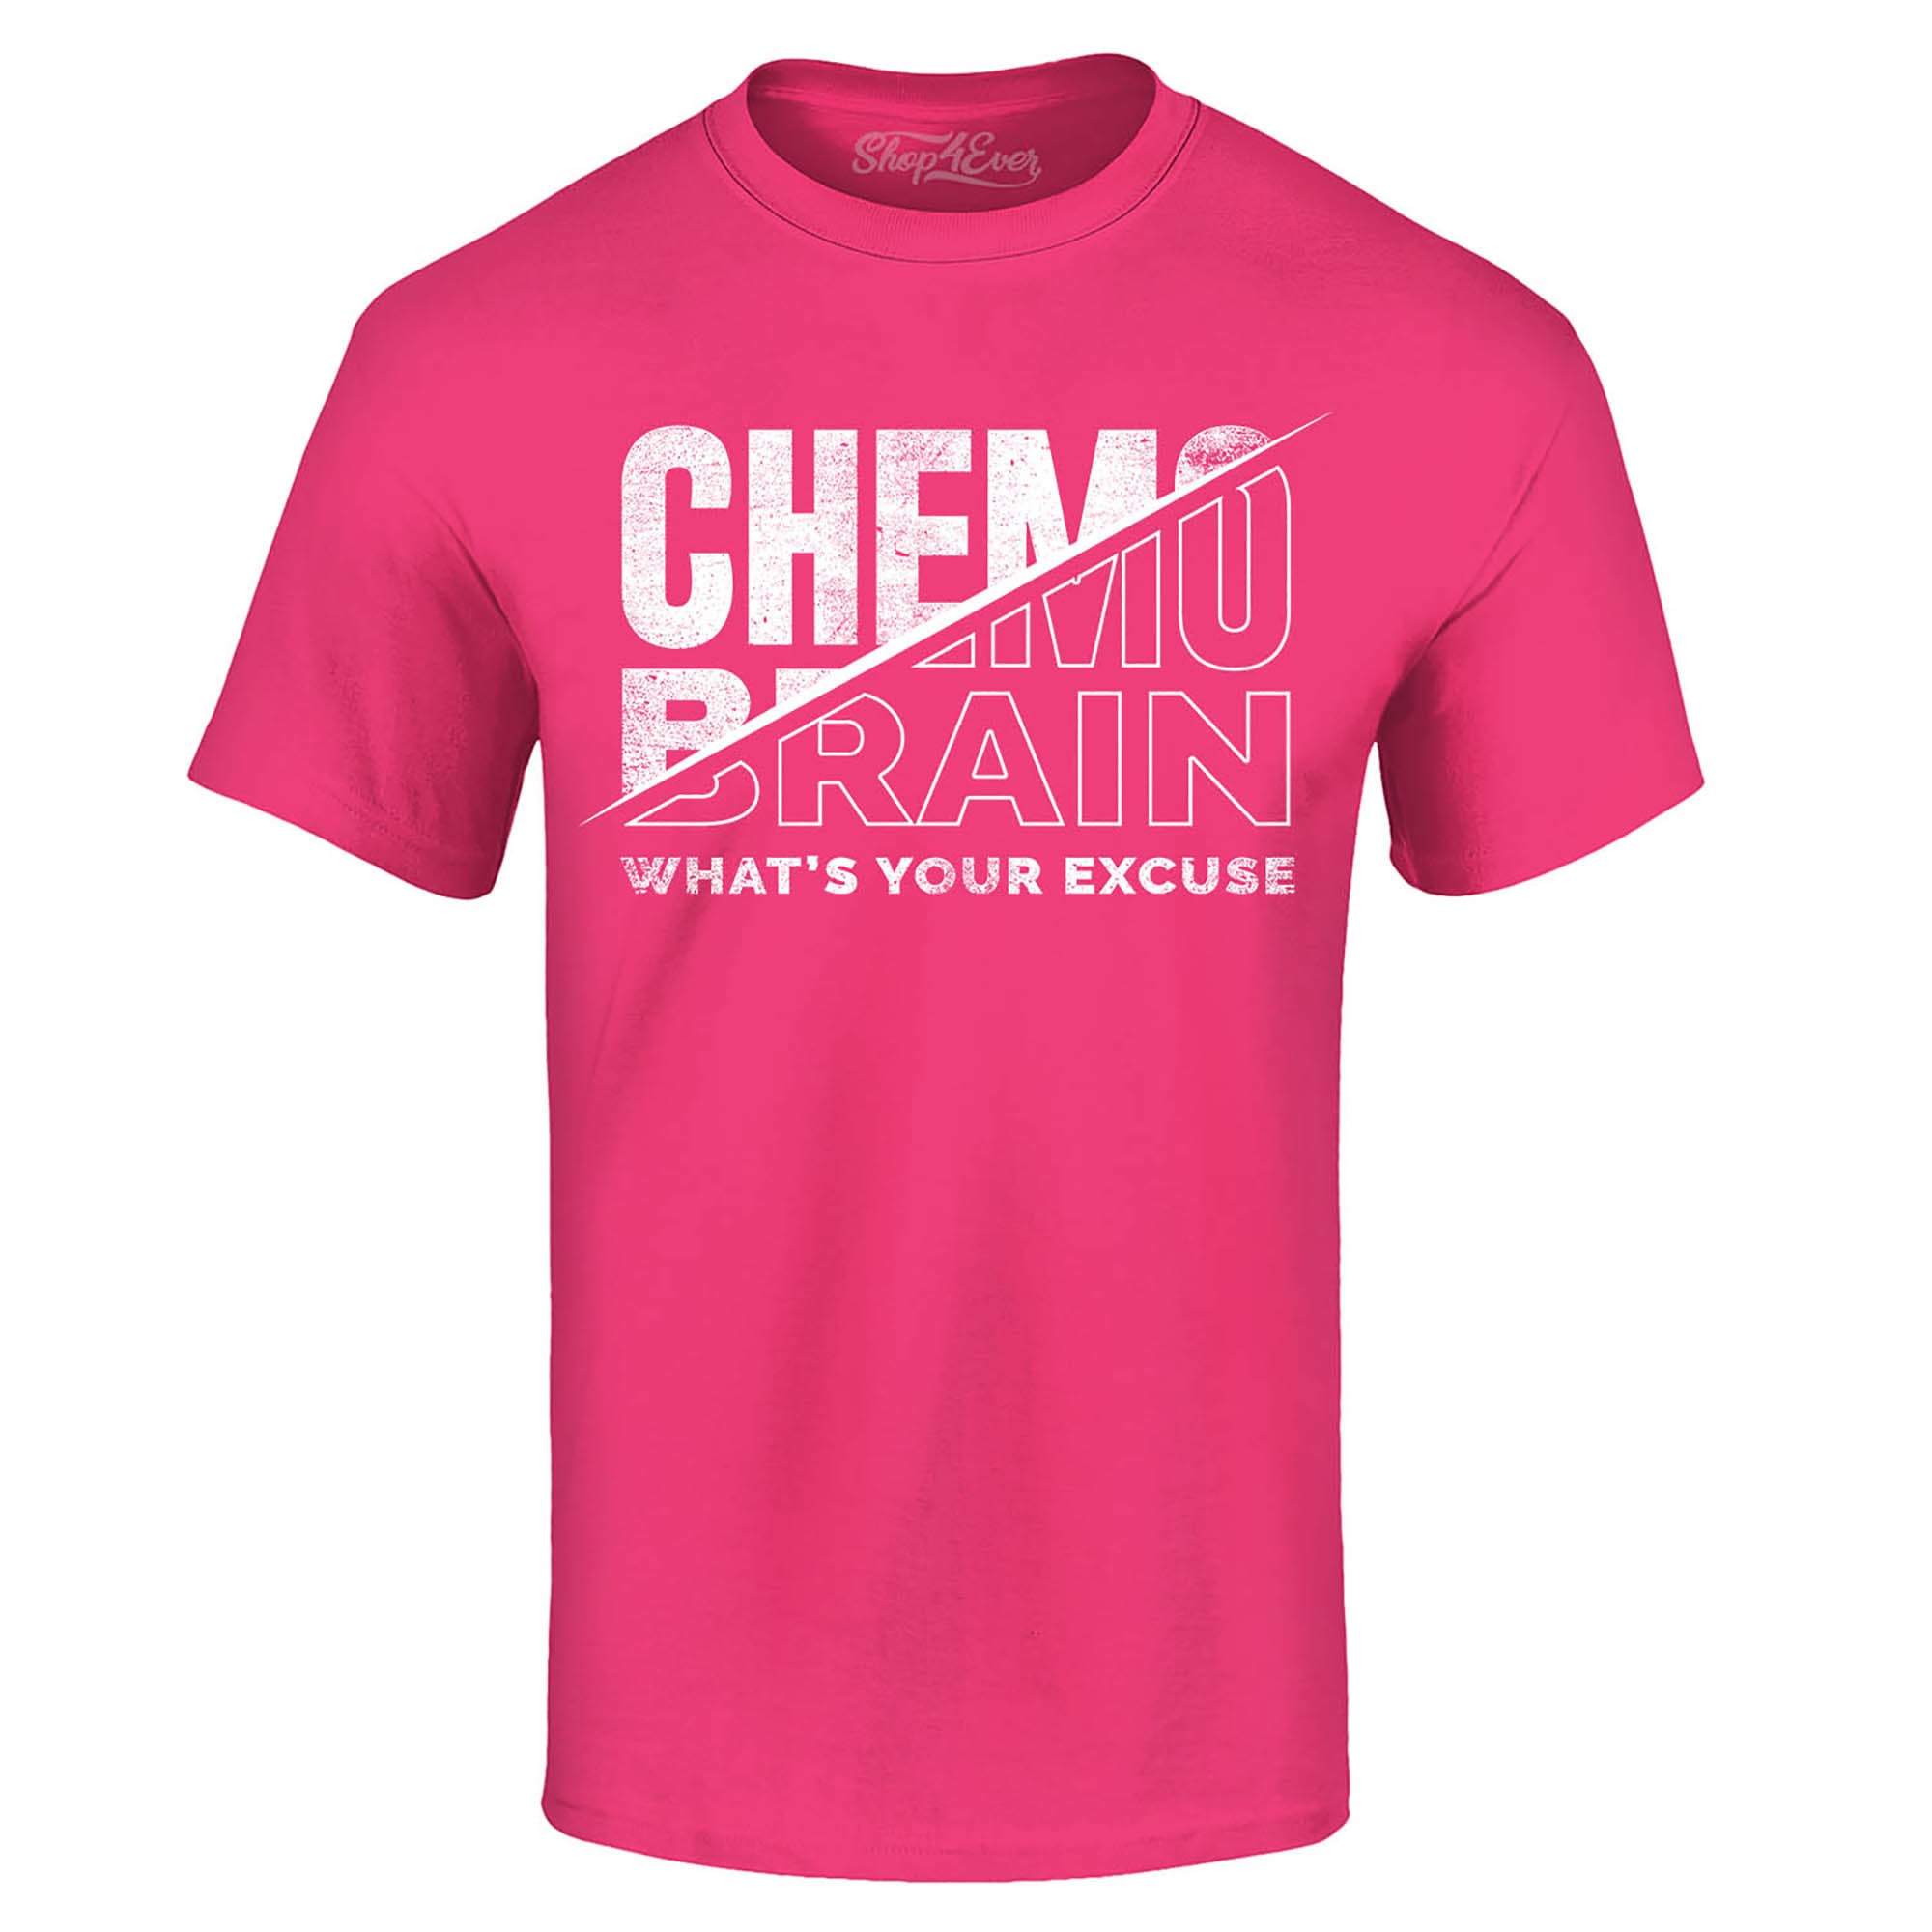 Chemo Brain What's Your Excuse? Funny T-Shirt